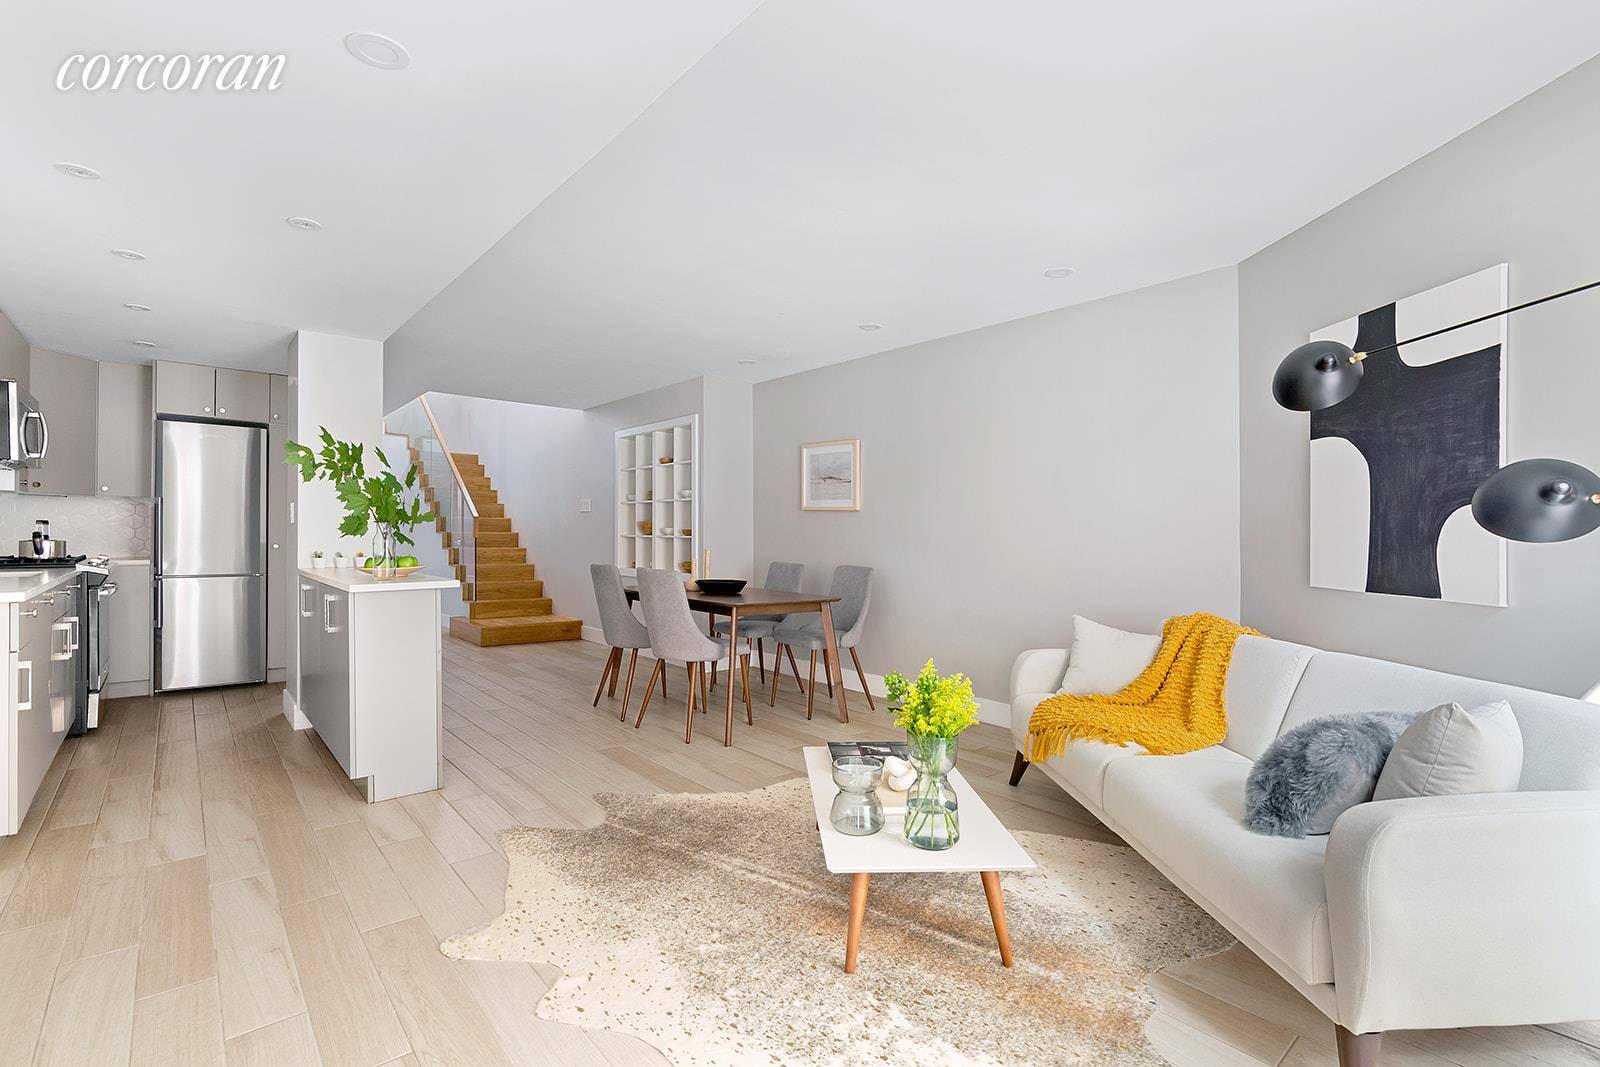 Massive 1, 766 sq ft Duplex with dual level private backyard space in Residence 1 at The Q Condos in Bed Stuy.